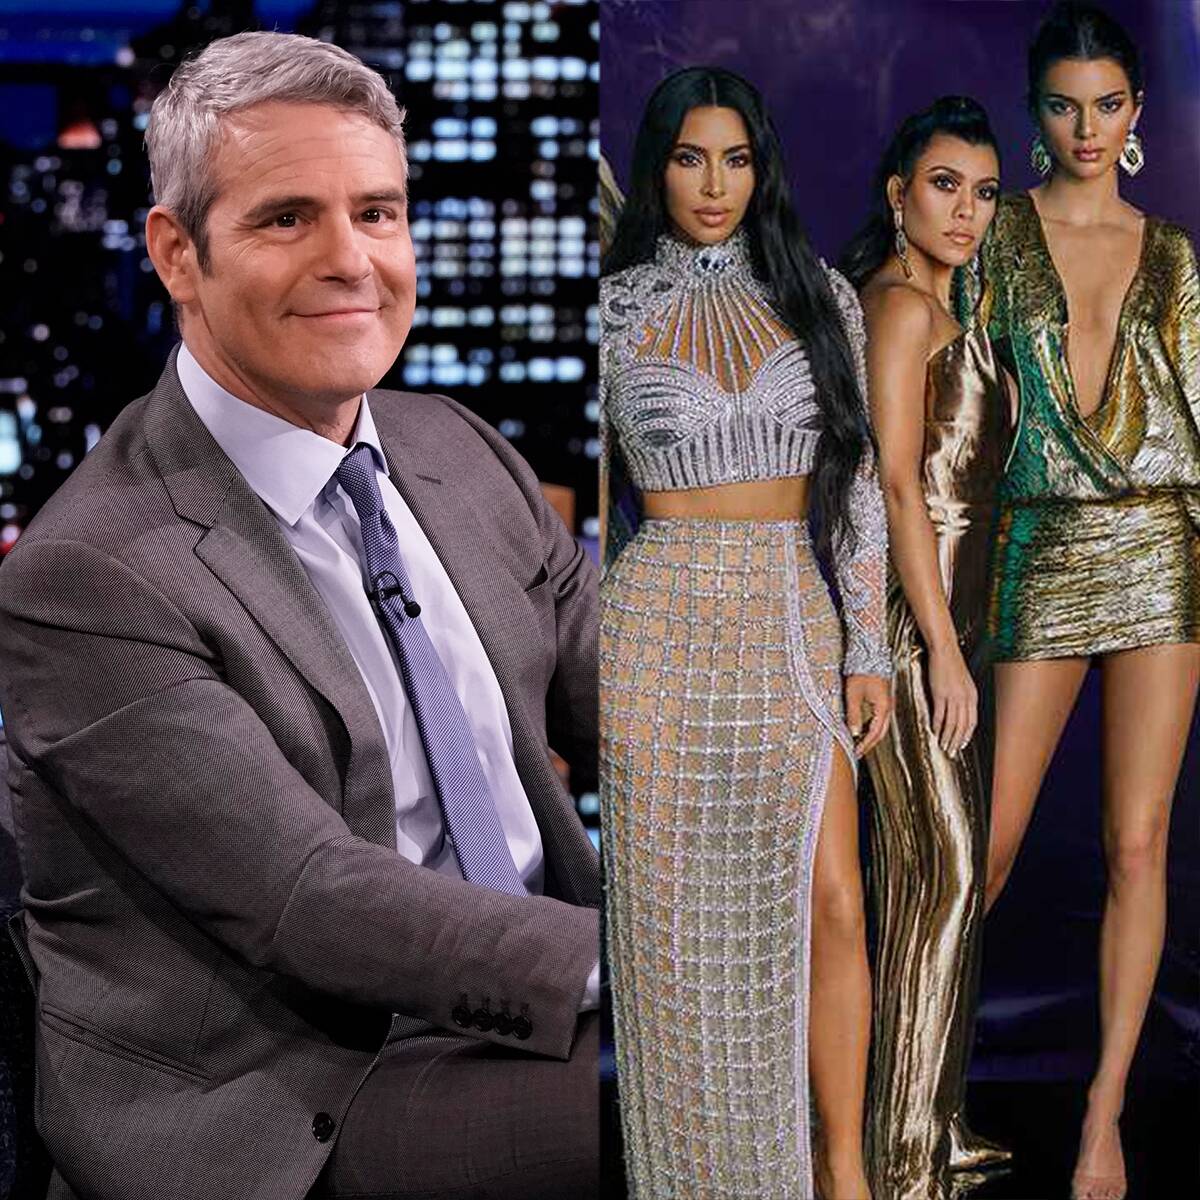 Andy Cohen Announces Keeping Up With the Kardashians Reunion in Hilarious Teaser